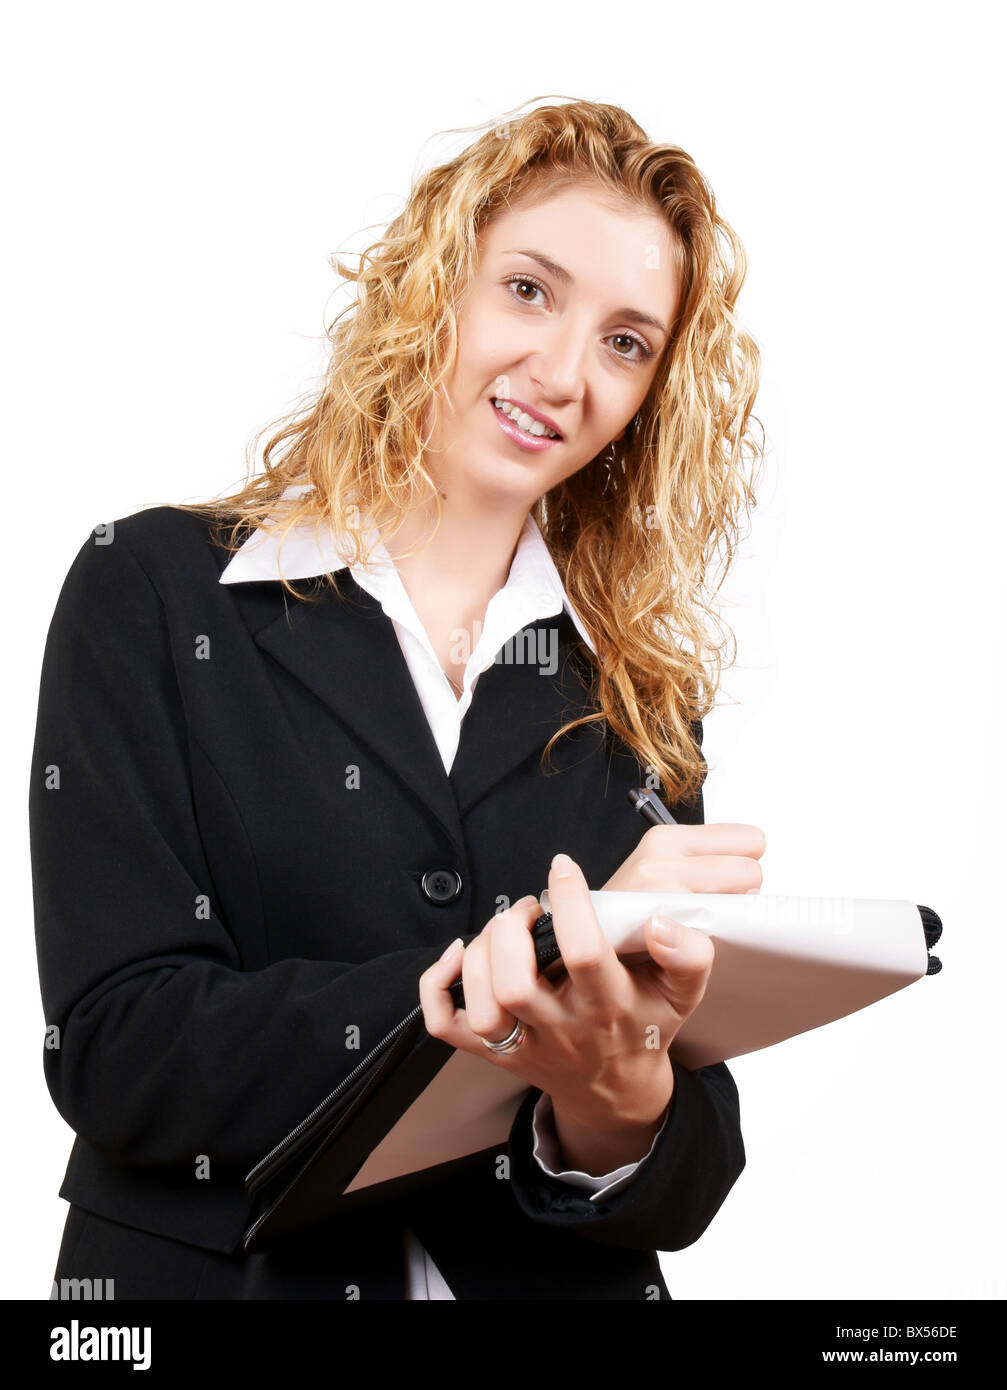 Blond, young businesswoman in black dress writing on her notepad Stock Photo